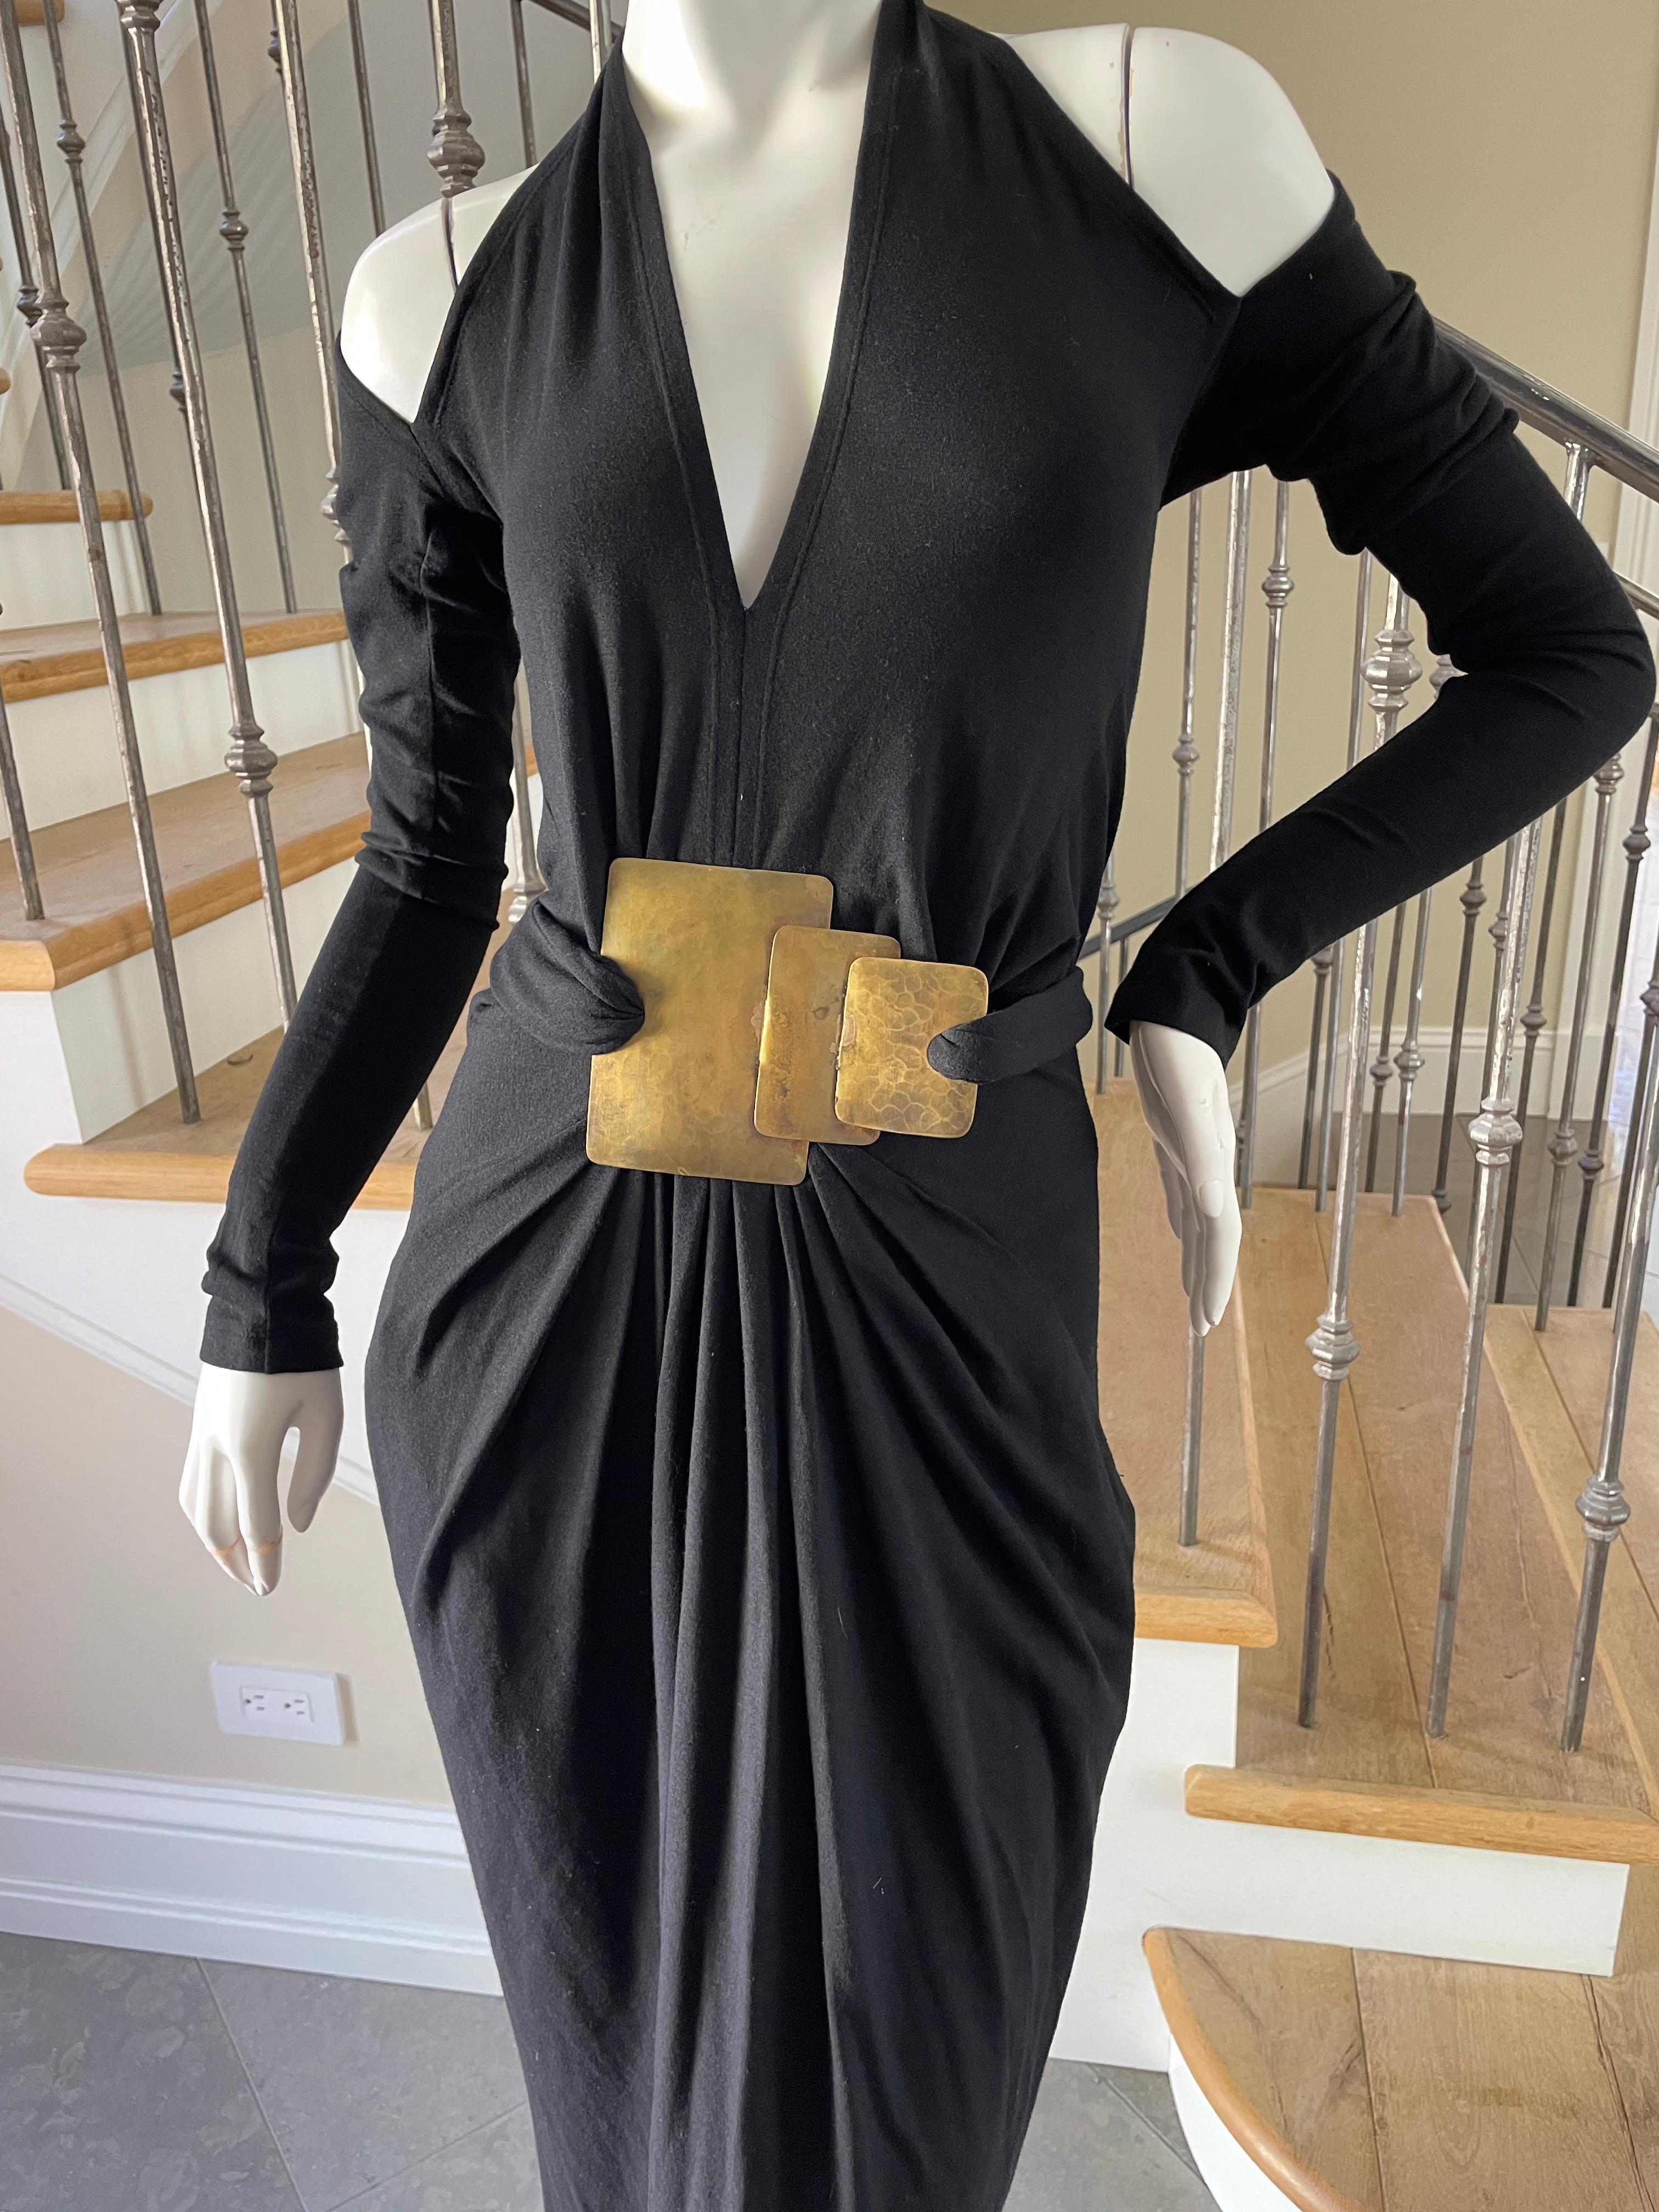 Donna Karan cold Shoulder Evening Dress with Robert Lee Morris Belt Ornament.
This was one of Donna's favorite dress of the collection, see photo of her wearing it with Robert Lee Morris.
Size S. There is a lot of stretch
Bust 34